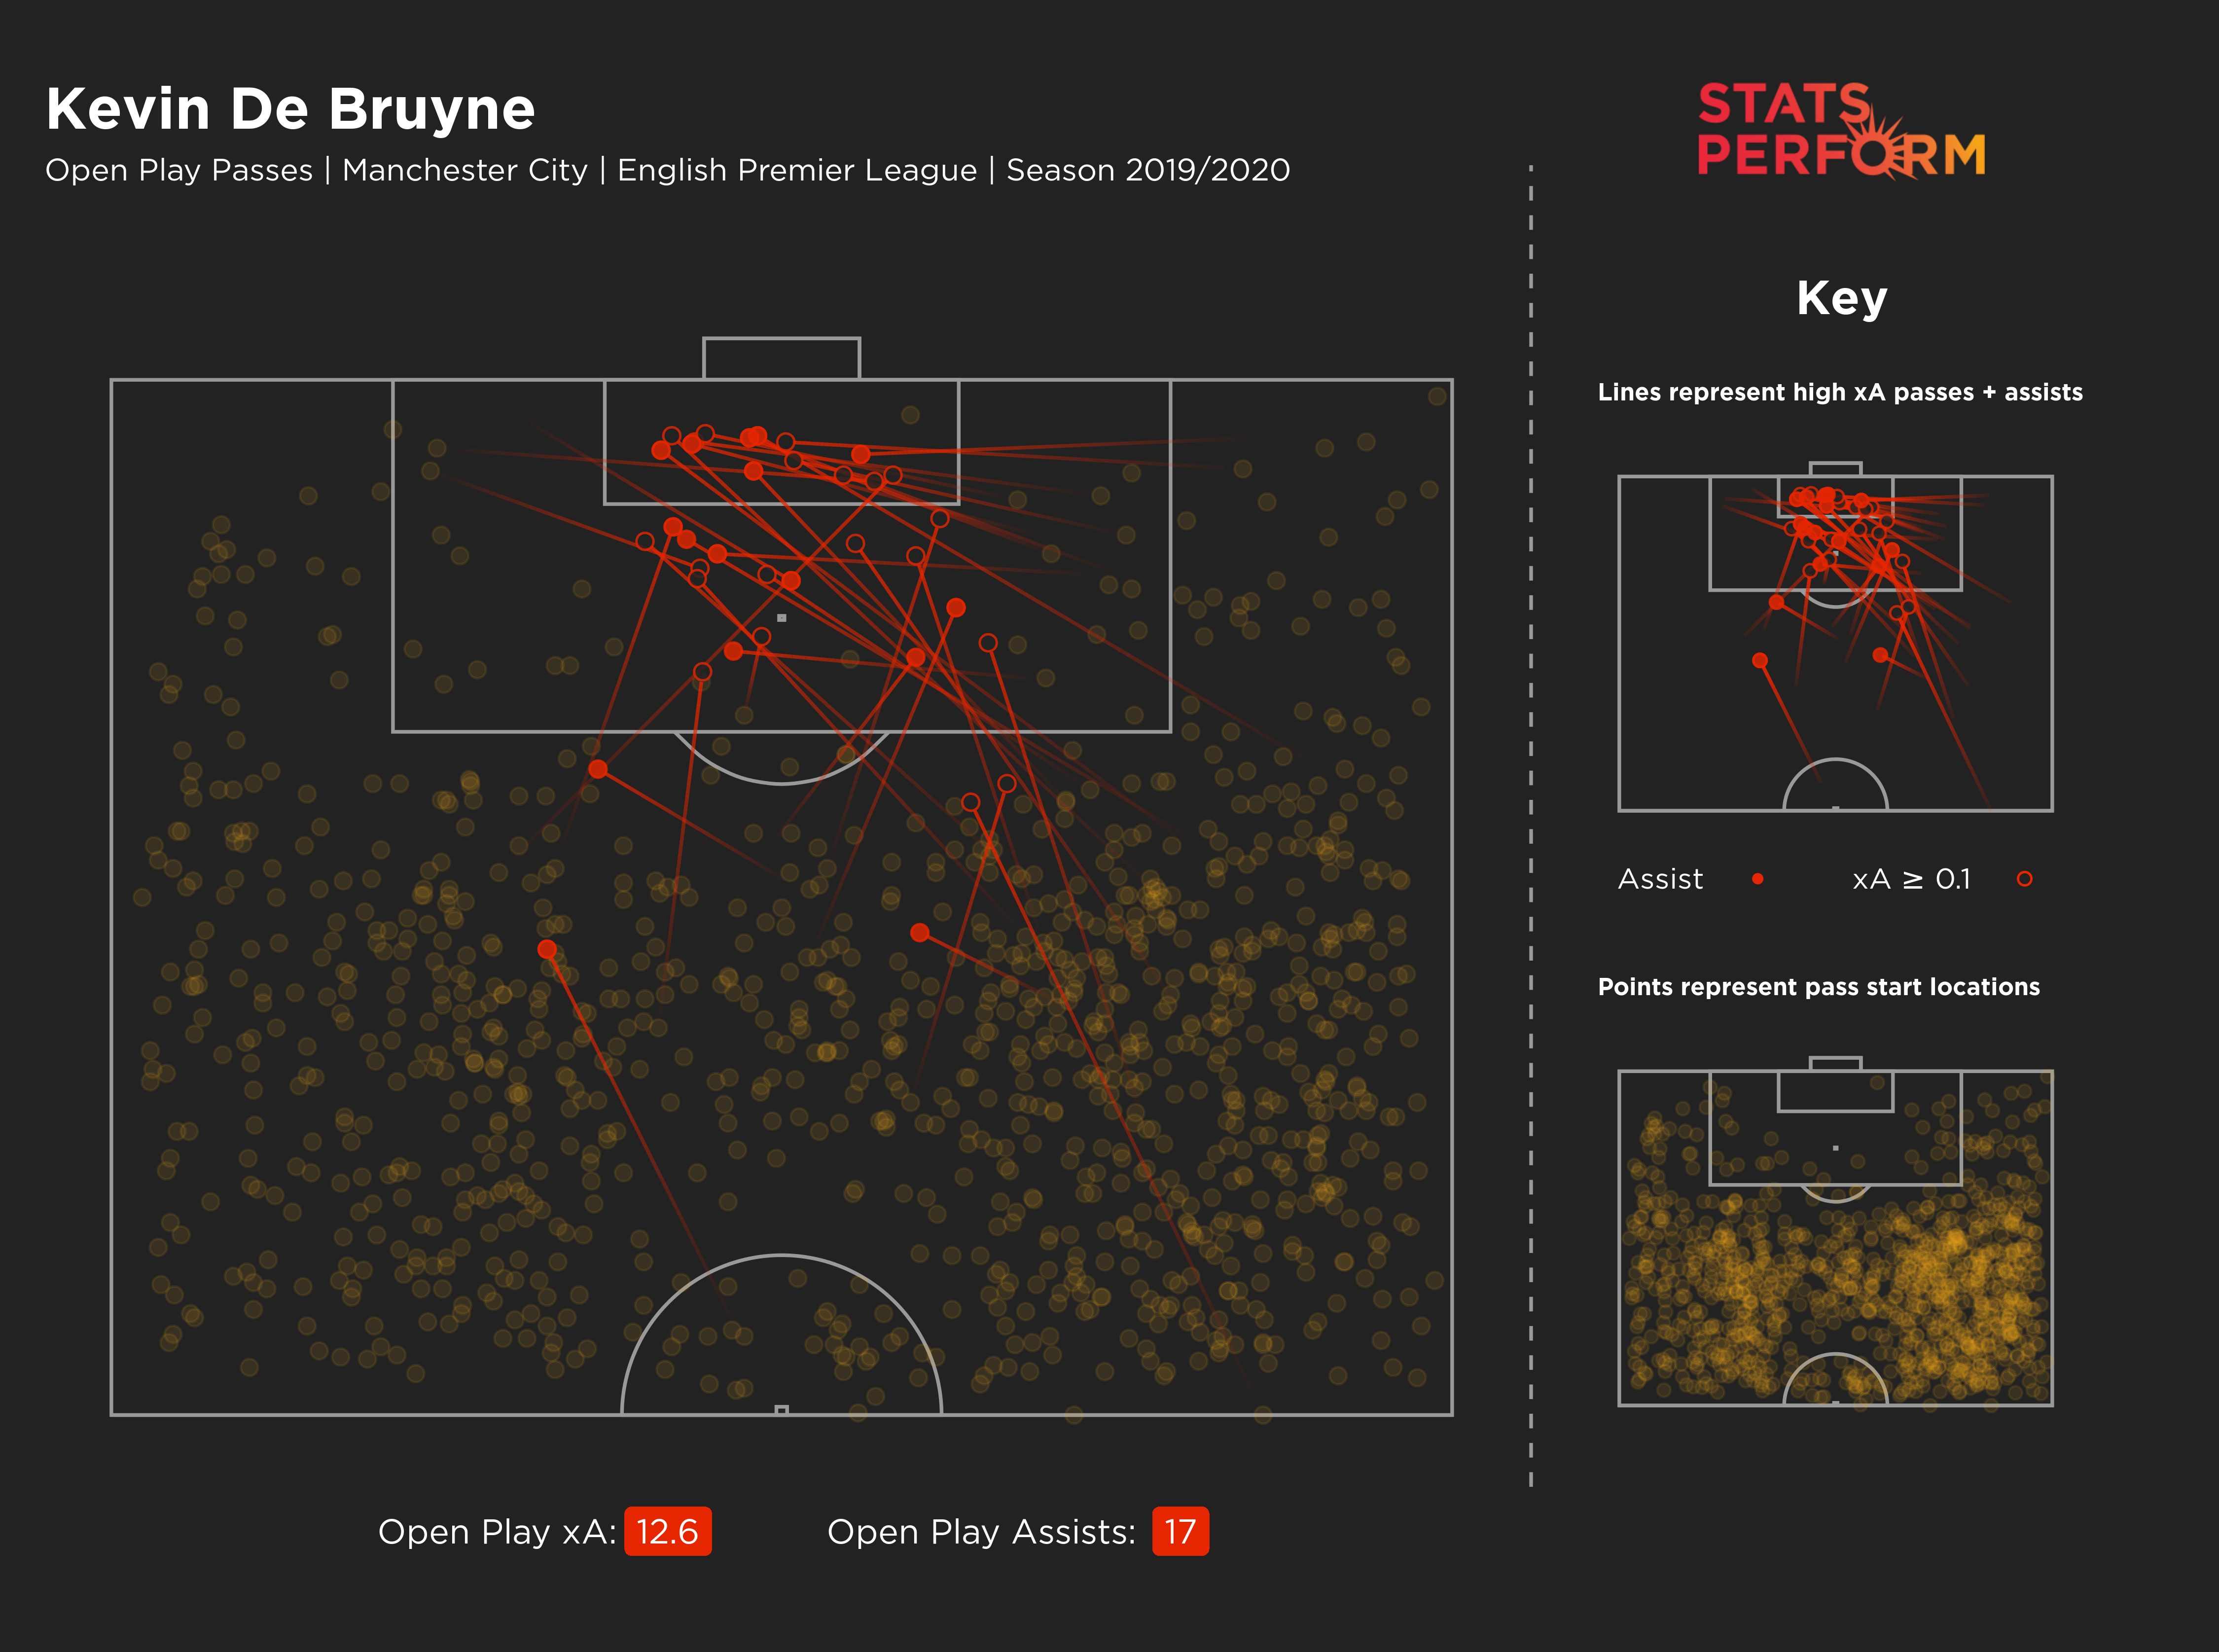 Kevin De Bruyne's 'open play passes' map for the 2019-20 season